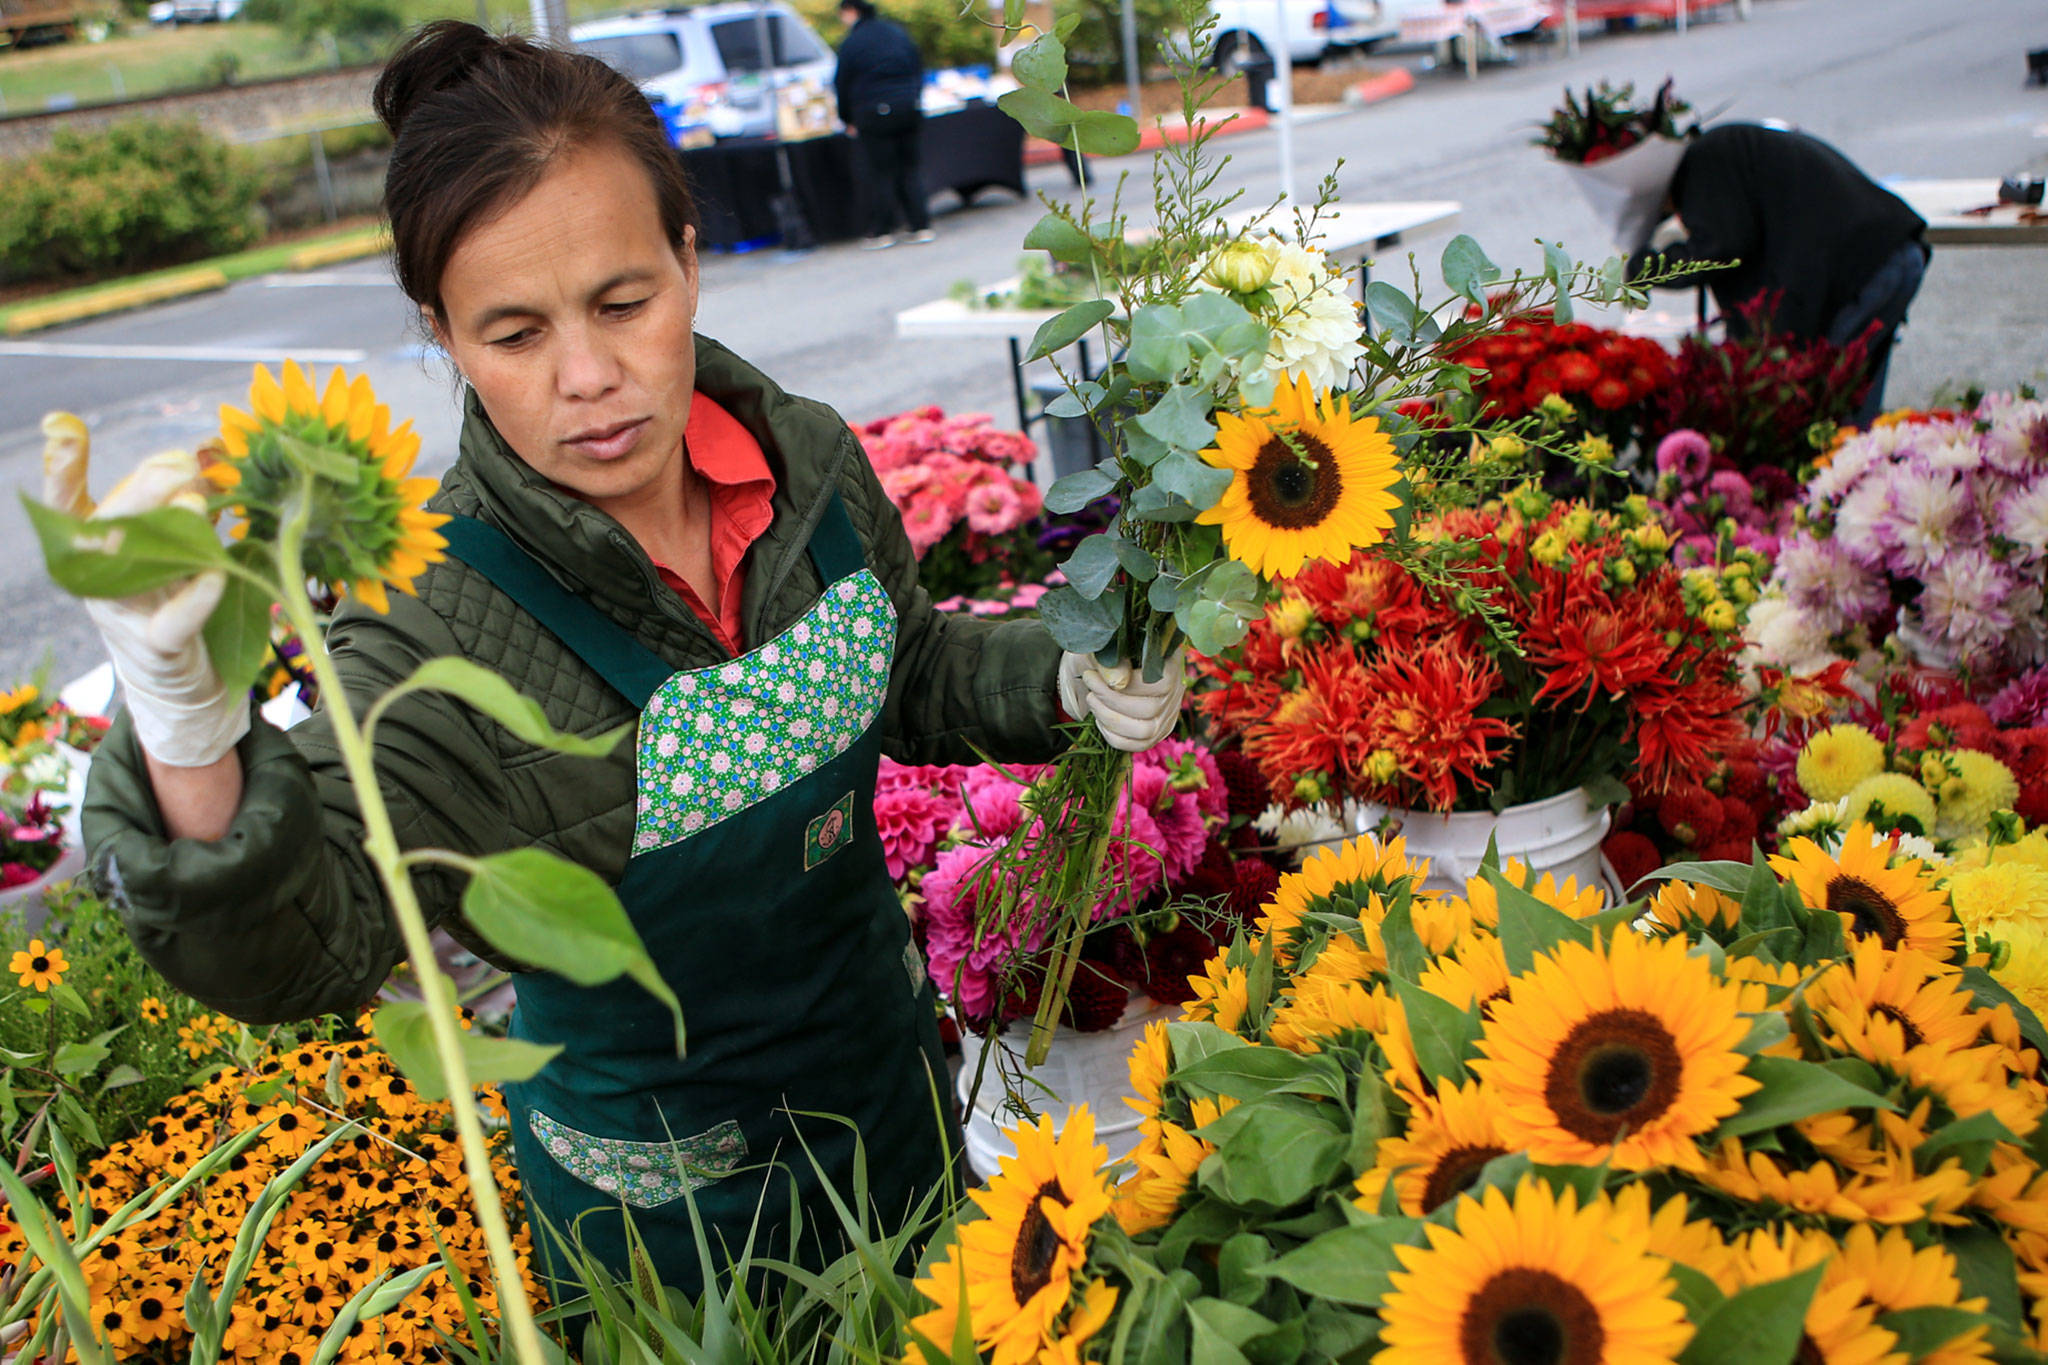 Cho Lee gathers flowers for arrangements before the opening of the Mukilteo Farmers Market at Mukilteo Lighthouse Park in 2016. (Kevin Clark / Herald file)